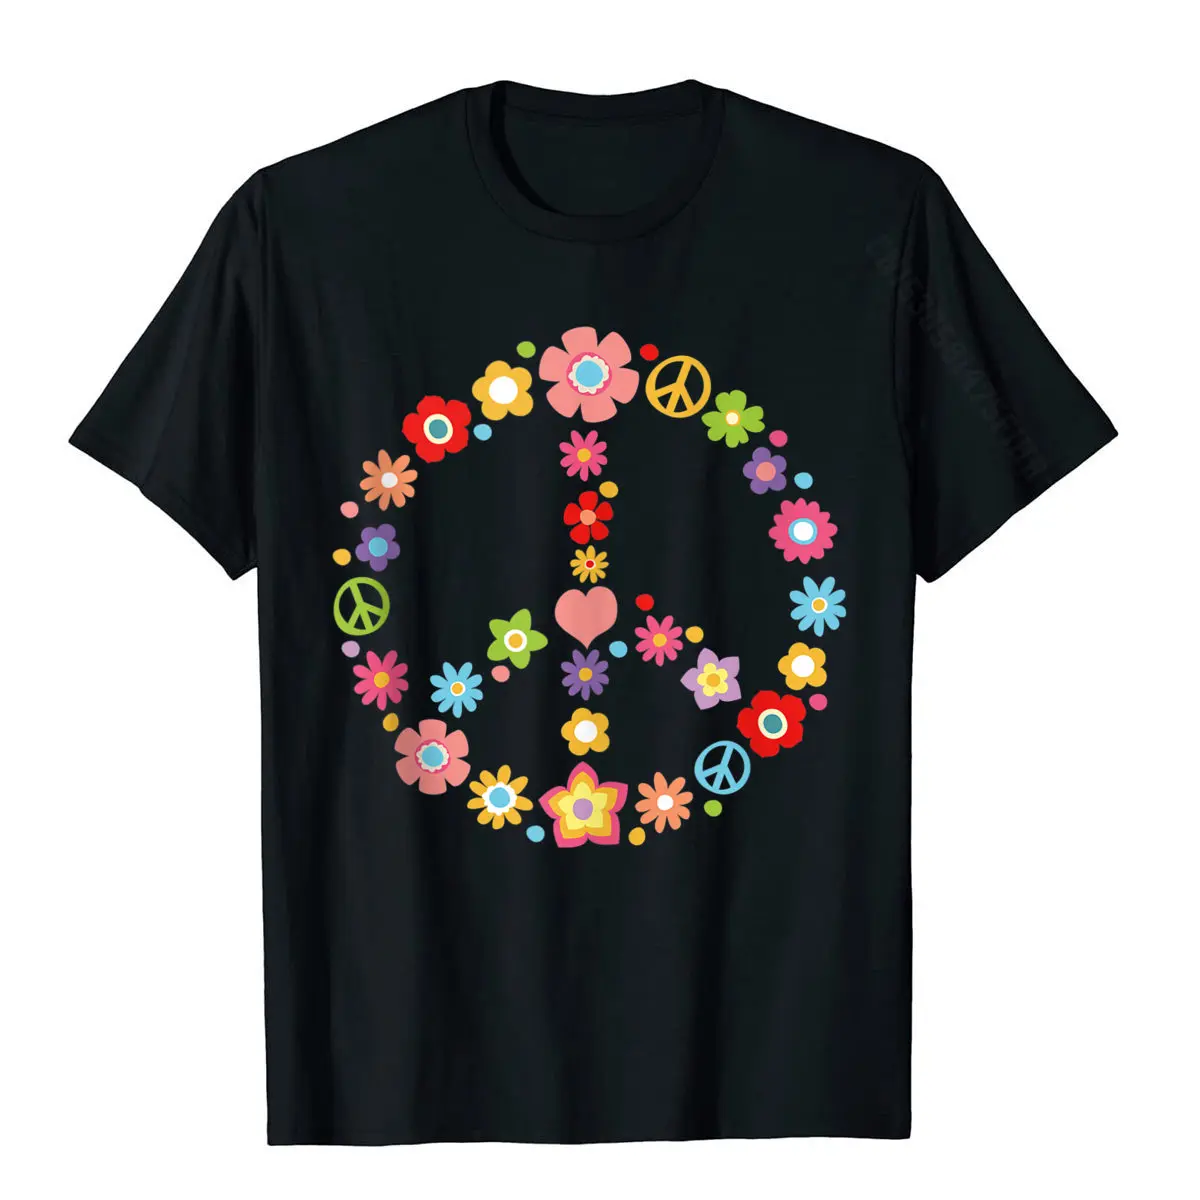 PEACE SIGN LOVE Flower 60s 70s Tie Dye Hippie Costume Gift Basic Top Top T-Shirts For Men Comics Tops Shirt Classic Cotton